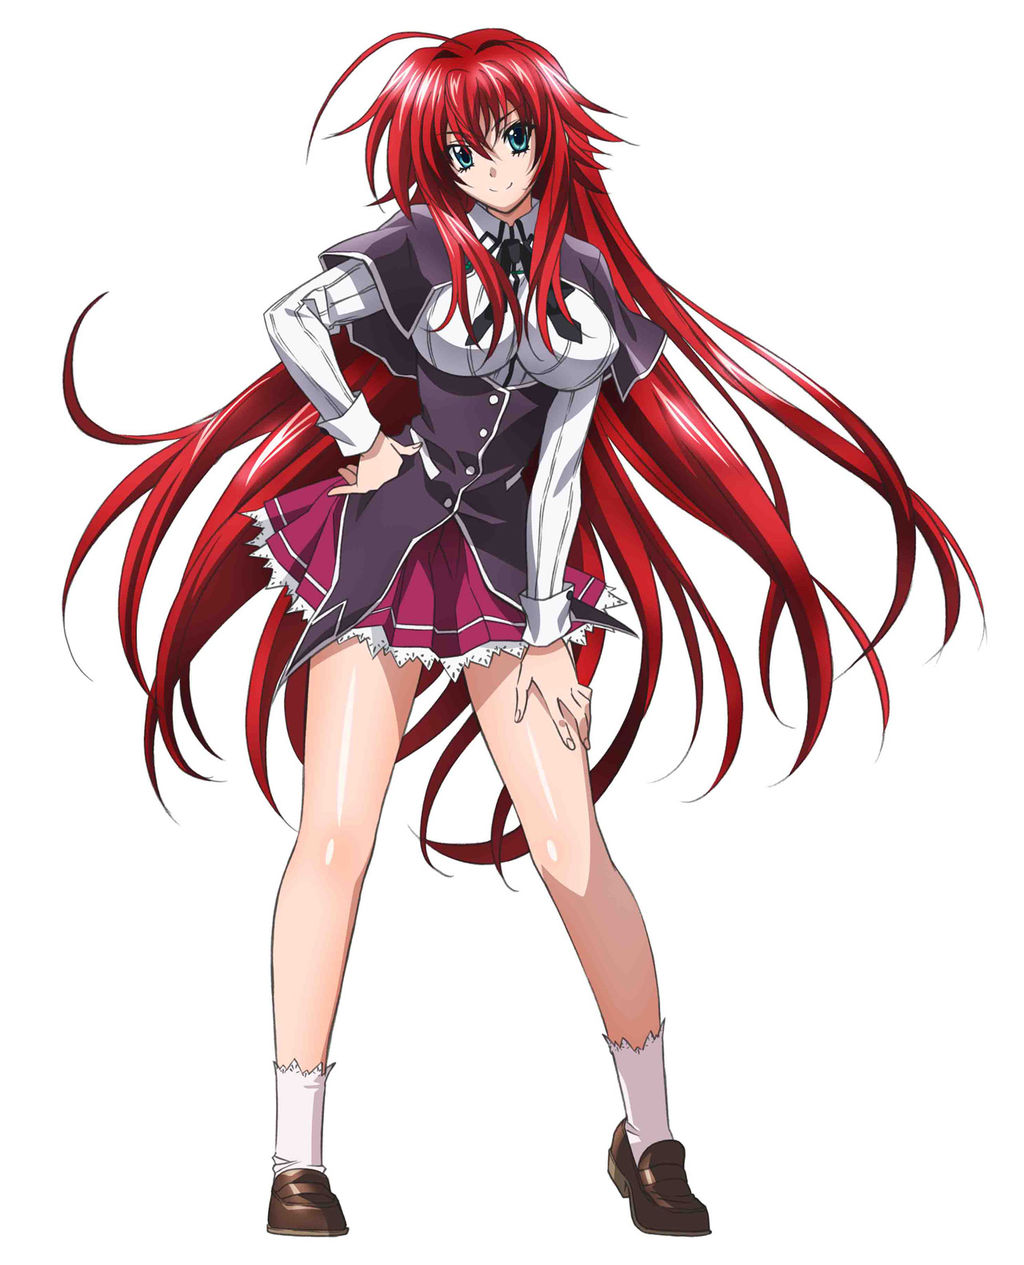 Which High School DxD Character Are You? (QUIZ)